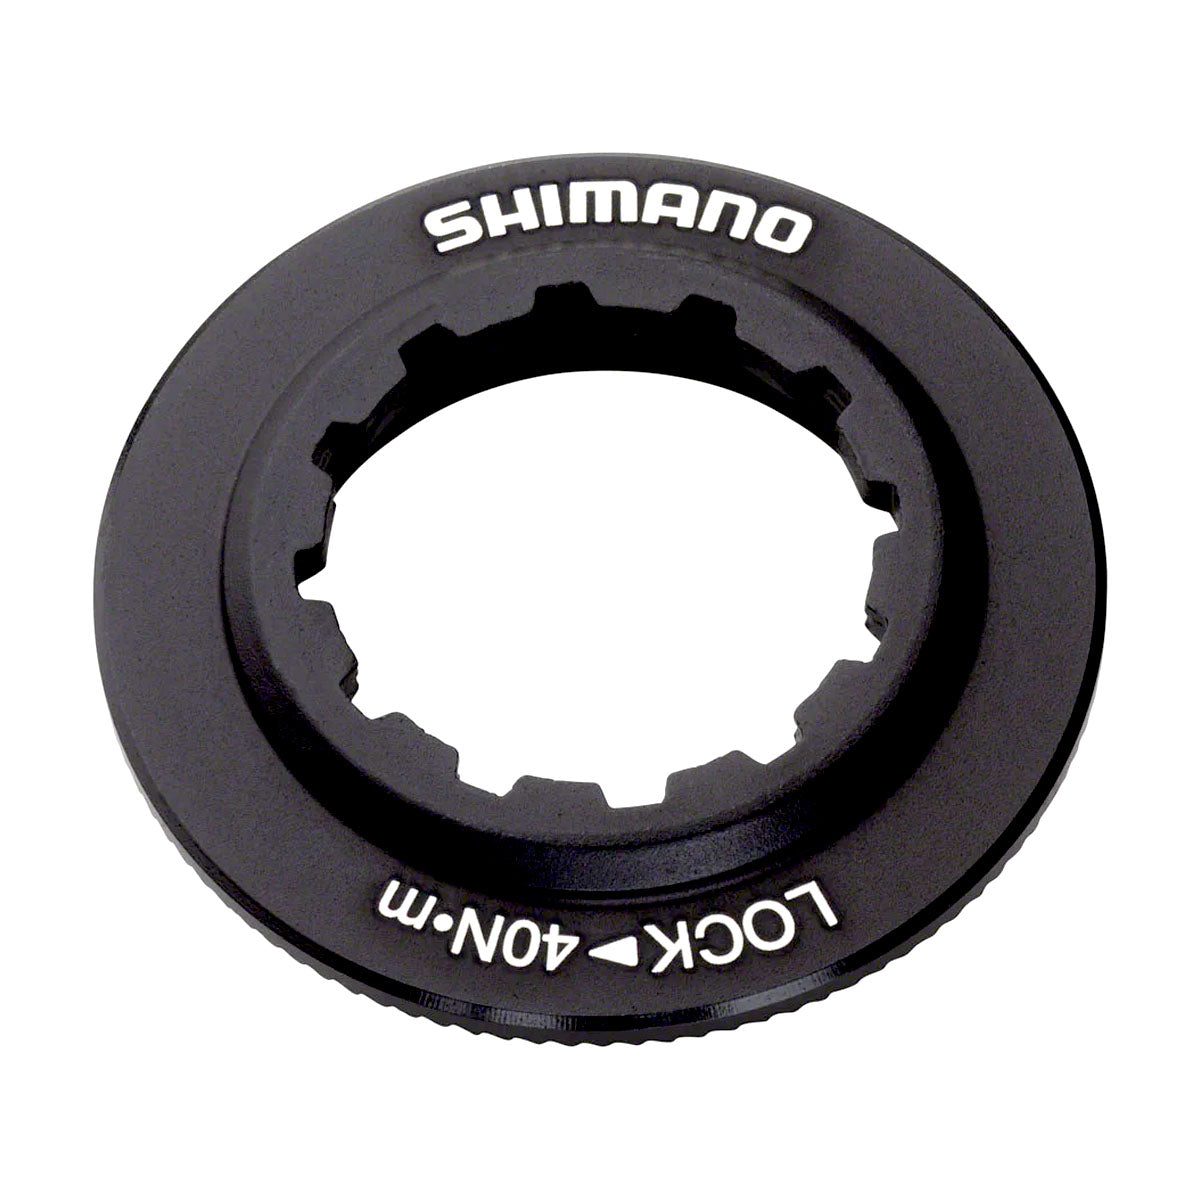 Shimano Rotor RT-MT800 CL SSI